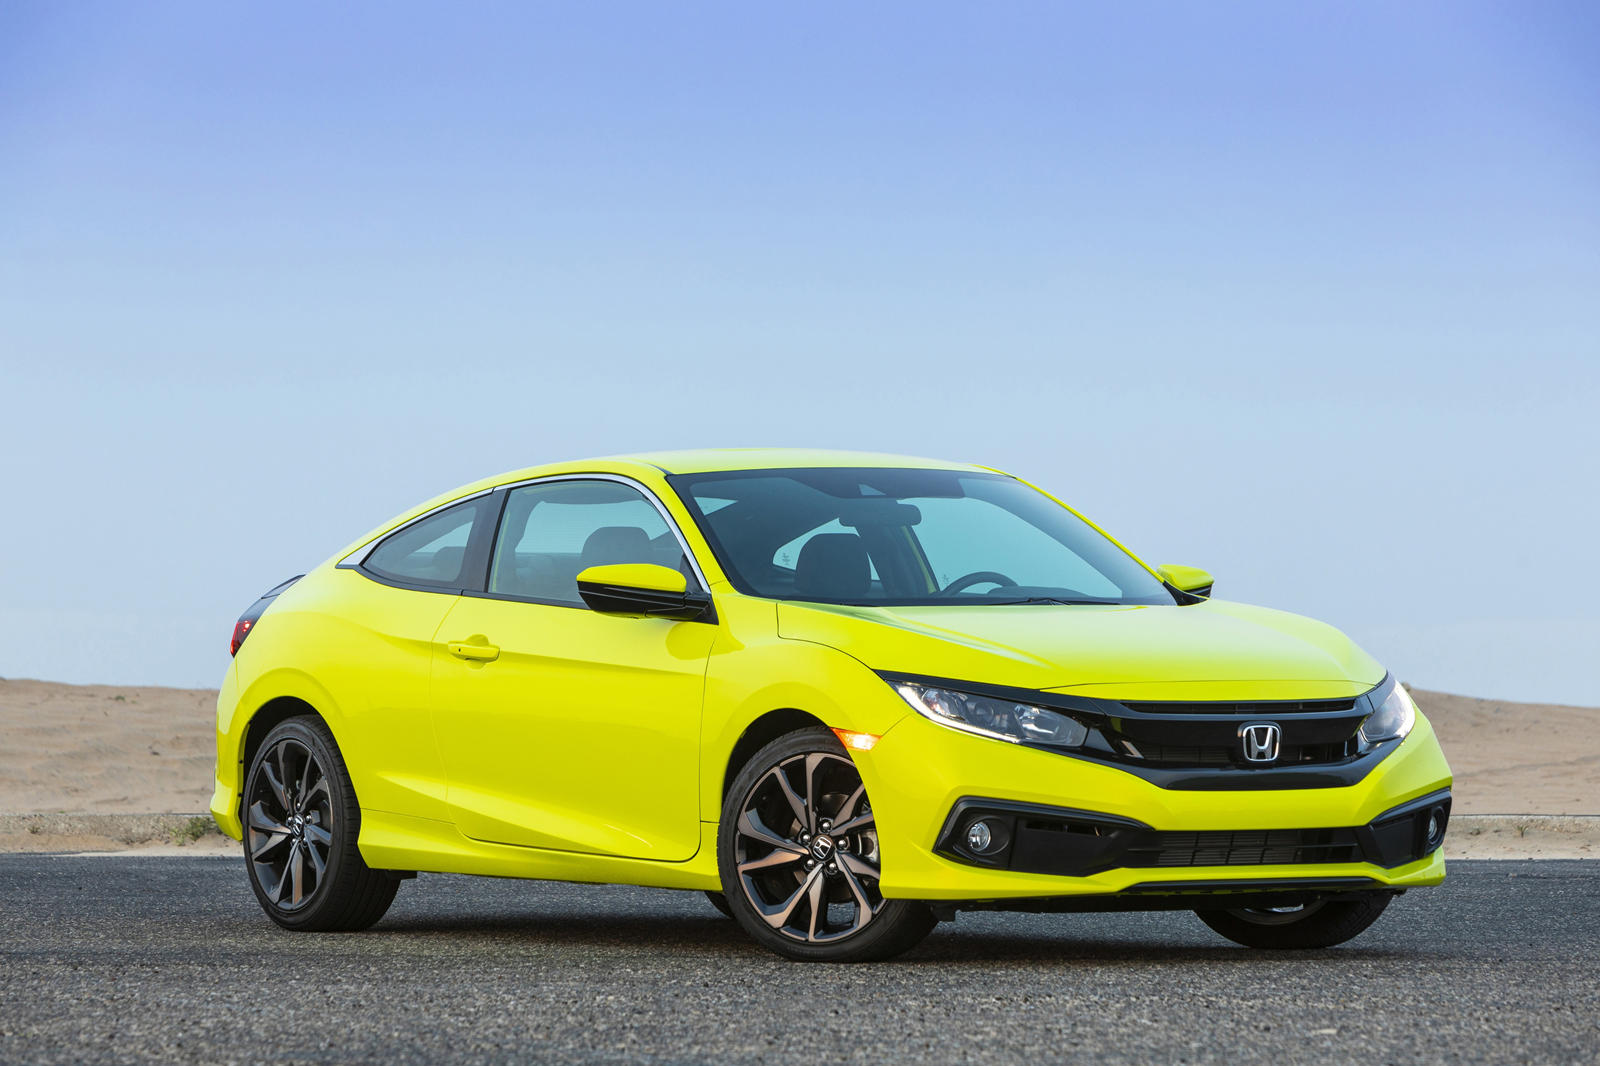 Used Honda Civic Coupe Yellow For Sale Near Me Check Photos And Prices